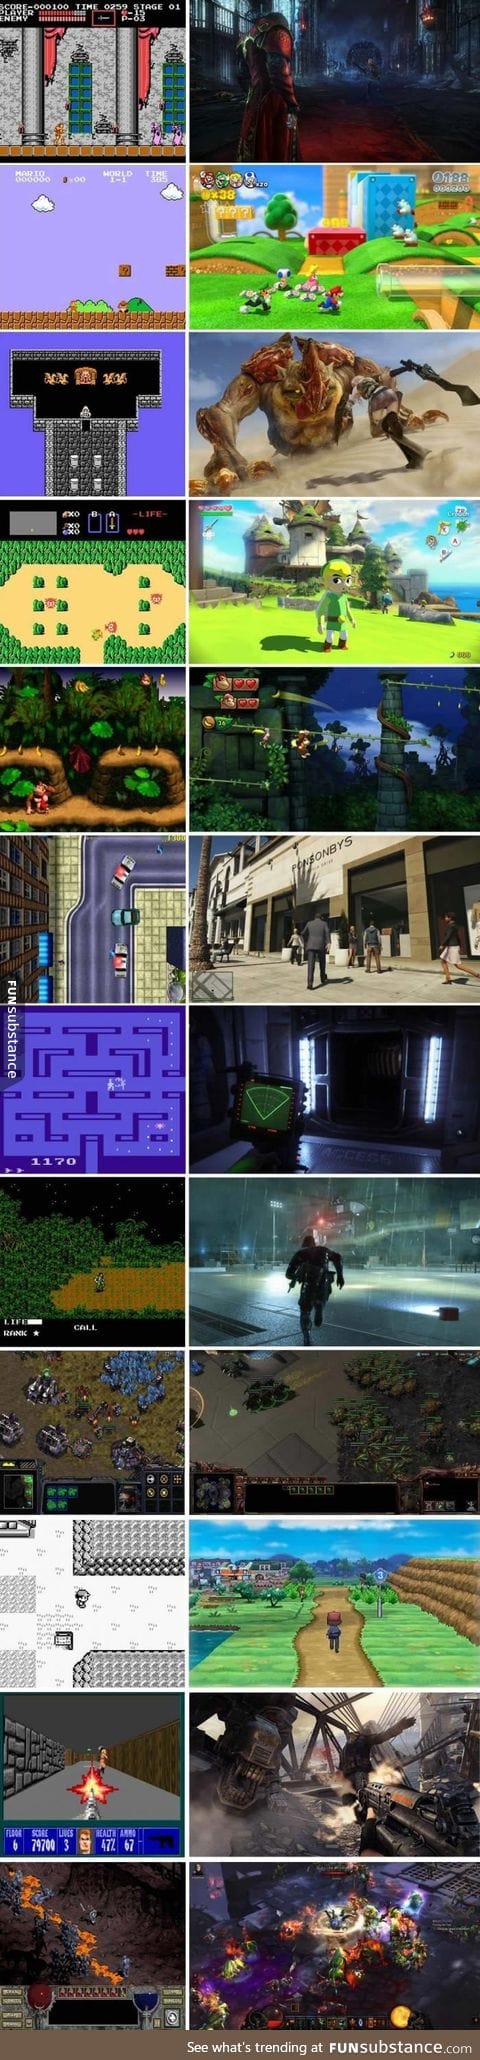 How far we've come with video games